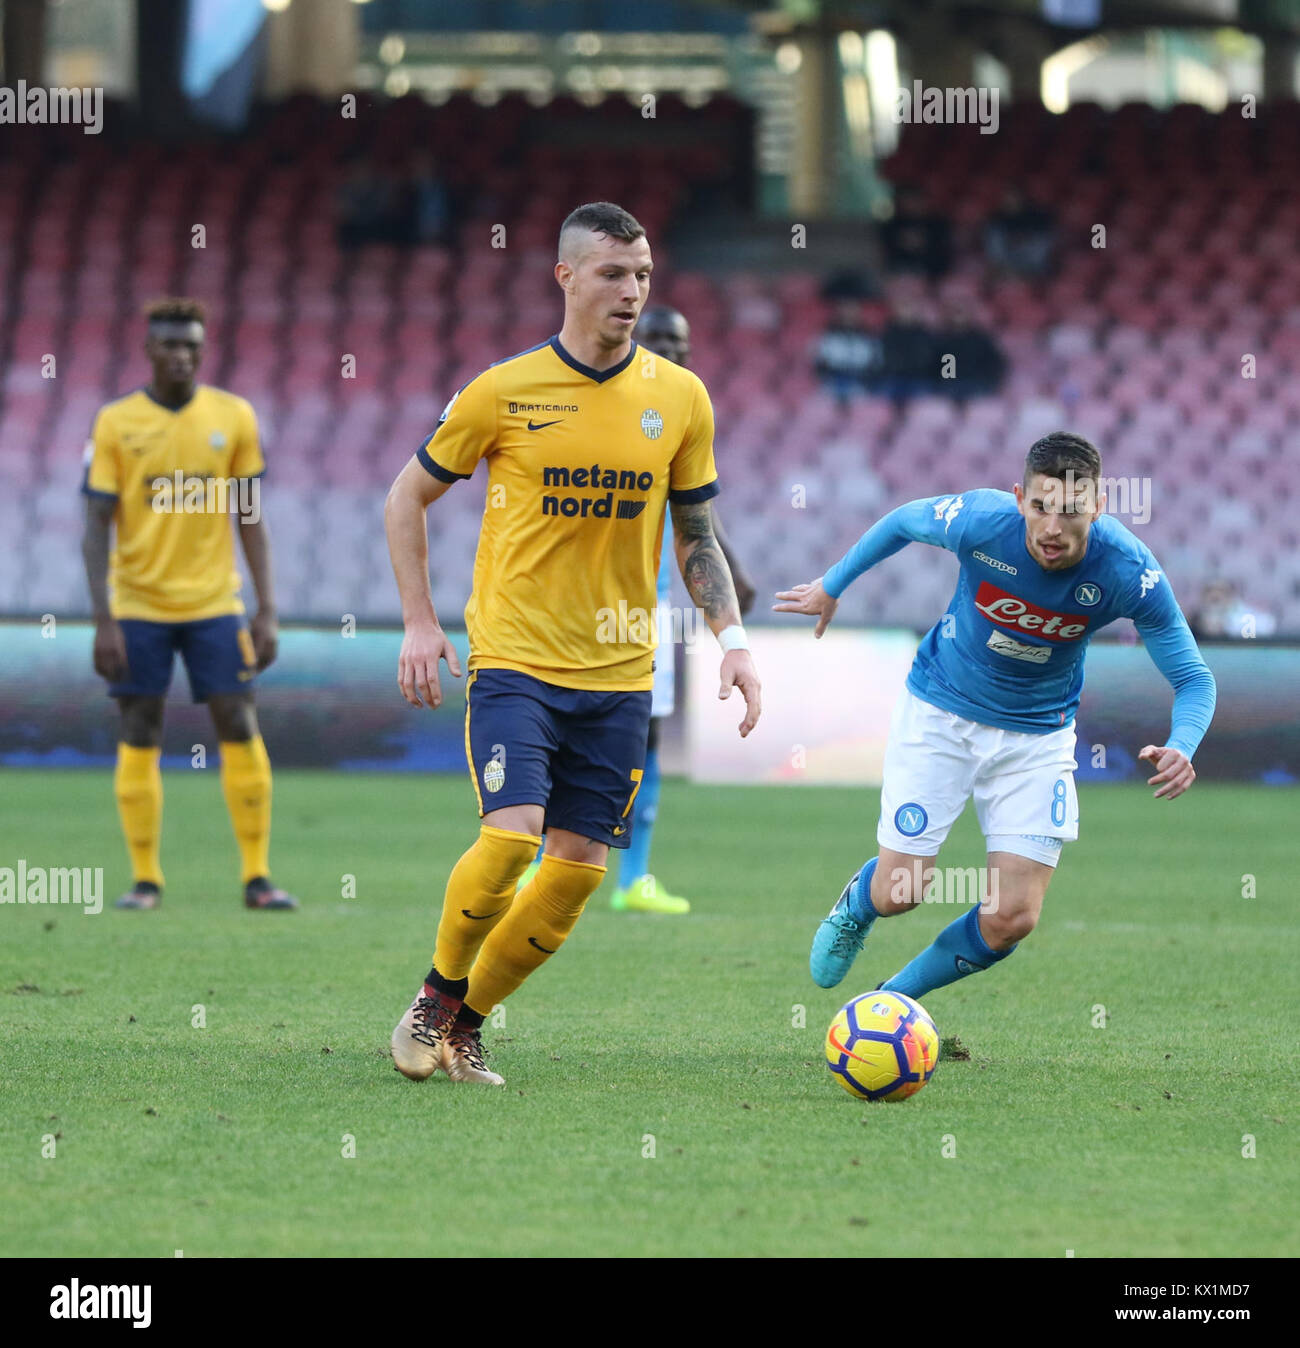 Naples, Italy, 6 January 2018. 6th Jan, 2018. In the picture The player of the Verona Buchel drips with the ball. at the San Paolo stadium in Naples, the two teams met with a lot of competitive tenacity. Credit: Fabio Sasso/ZUMA Wire/Alamy Live News Stock Photo